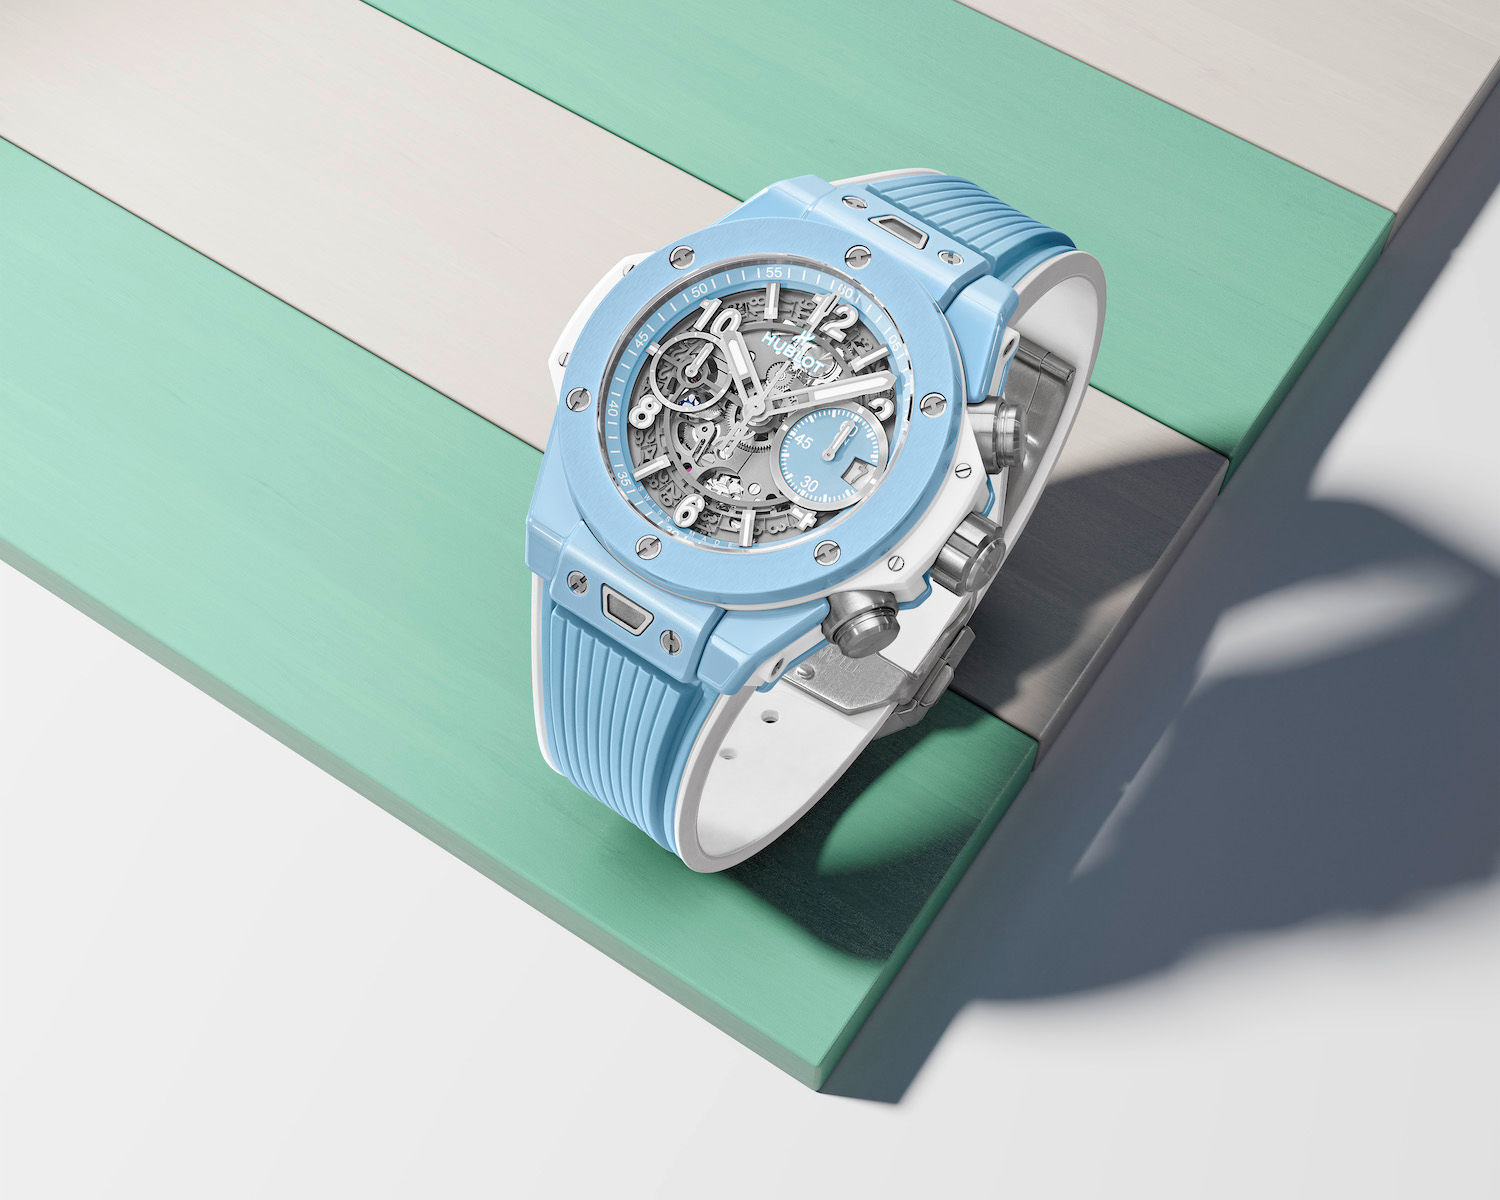 Hublot unveils new range of high-end watches